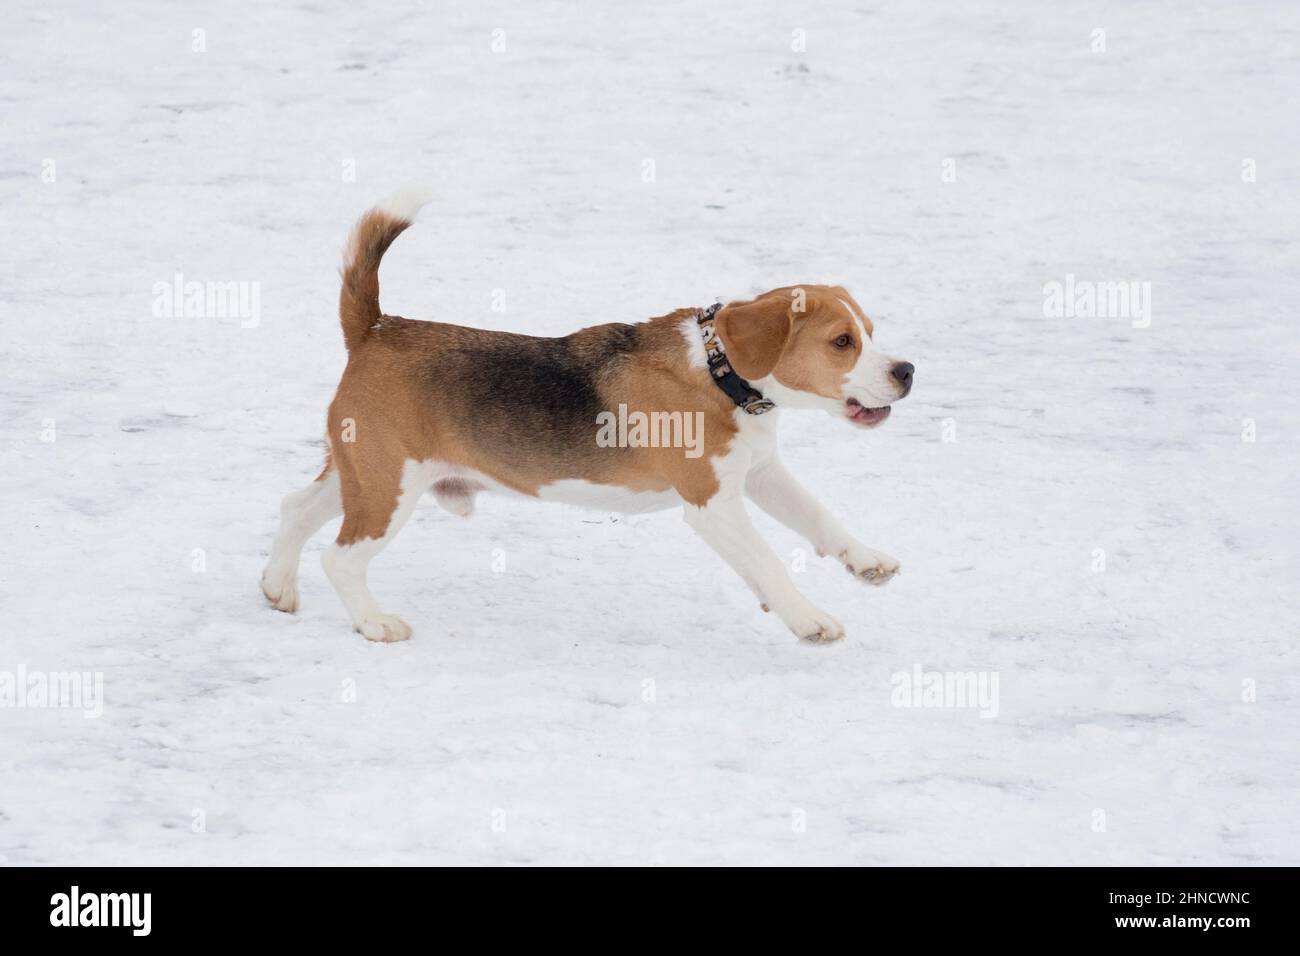 Cute english beagle puppy is running on a white snow in the winter park. Pet animals. Purebred dog. Stock Photo